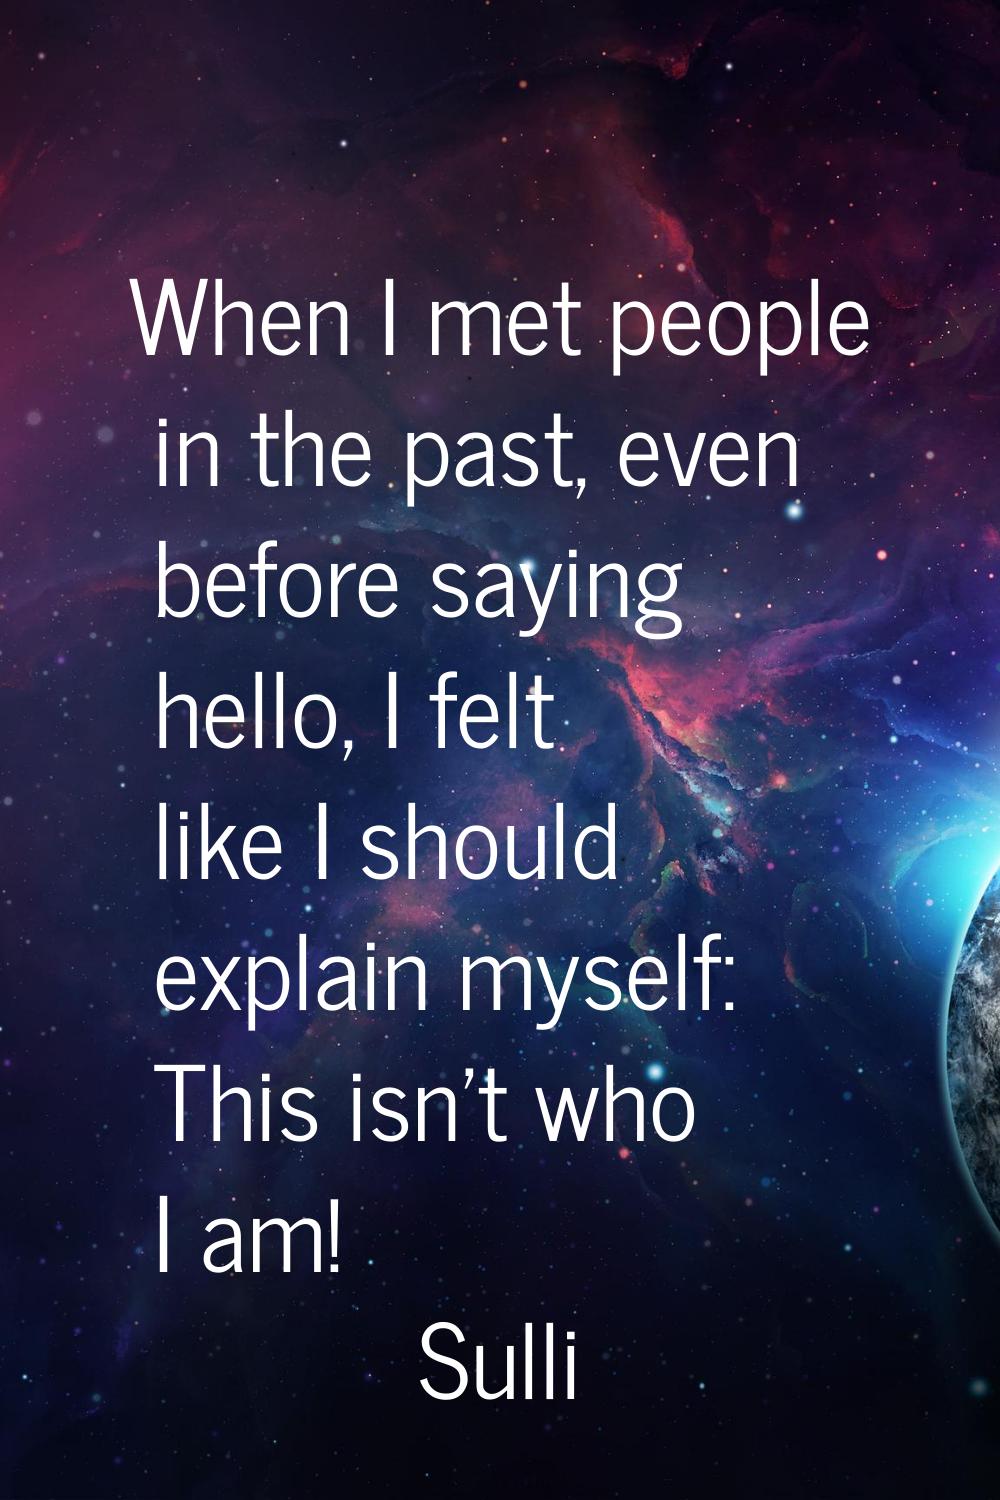 When I met people in the past, even before saying hello, I felt like I should explain myself: This 